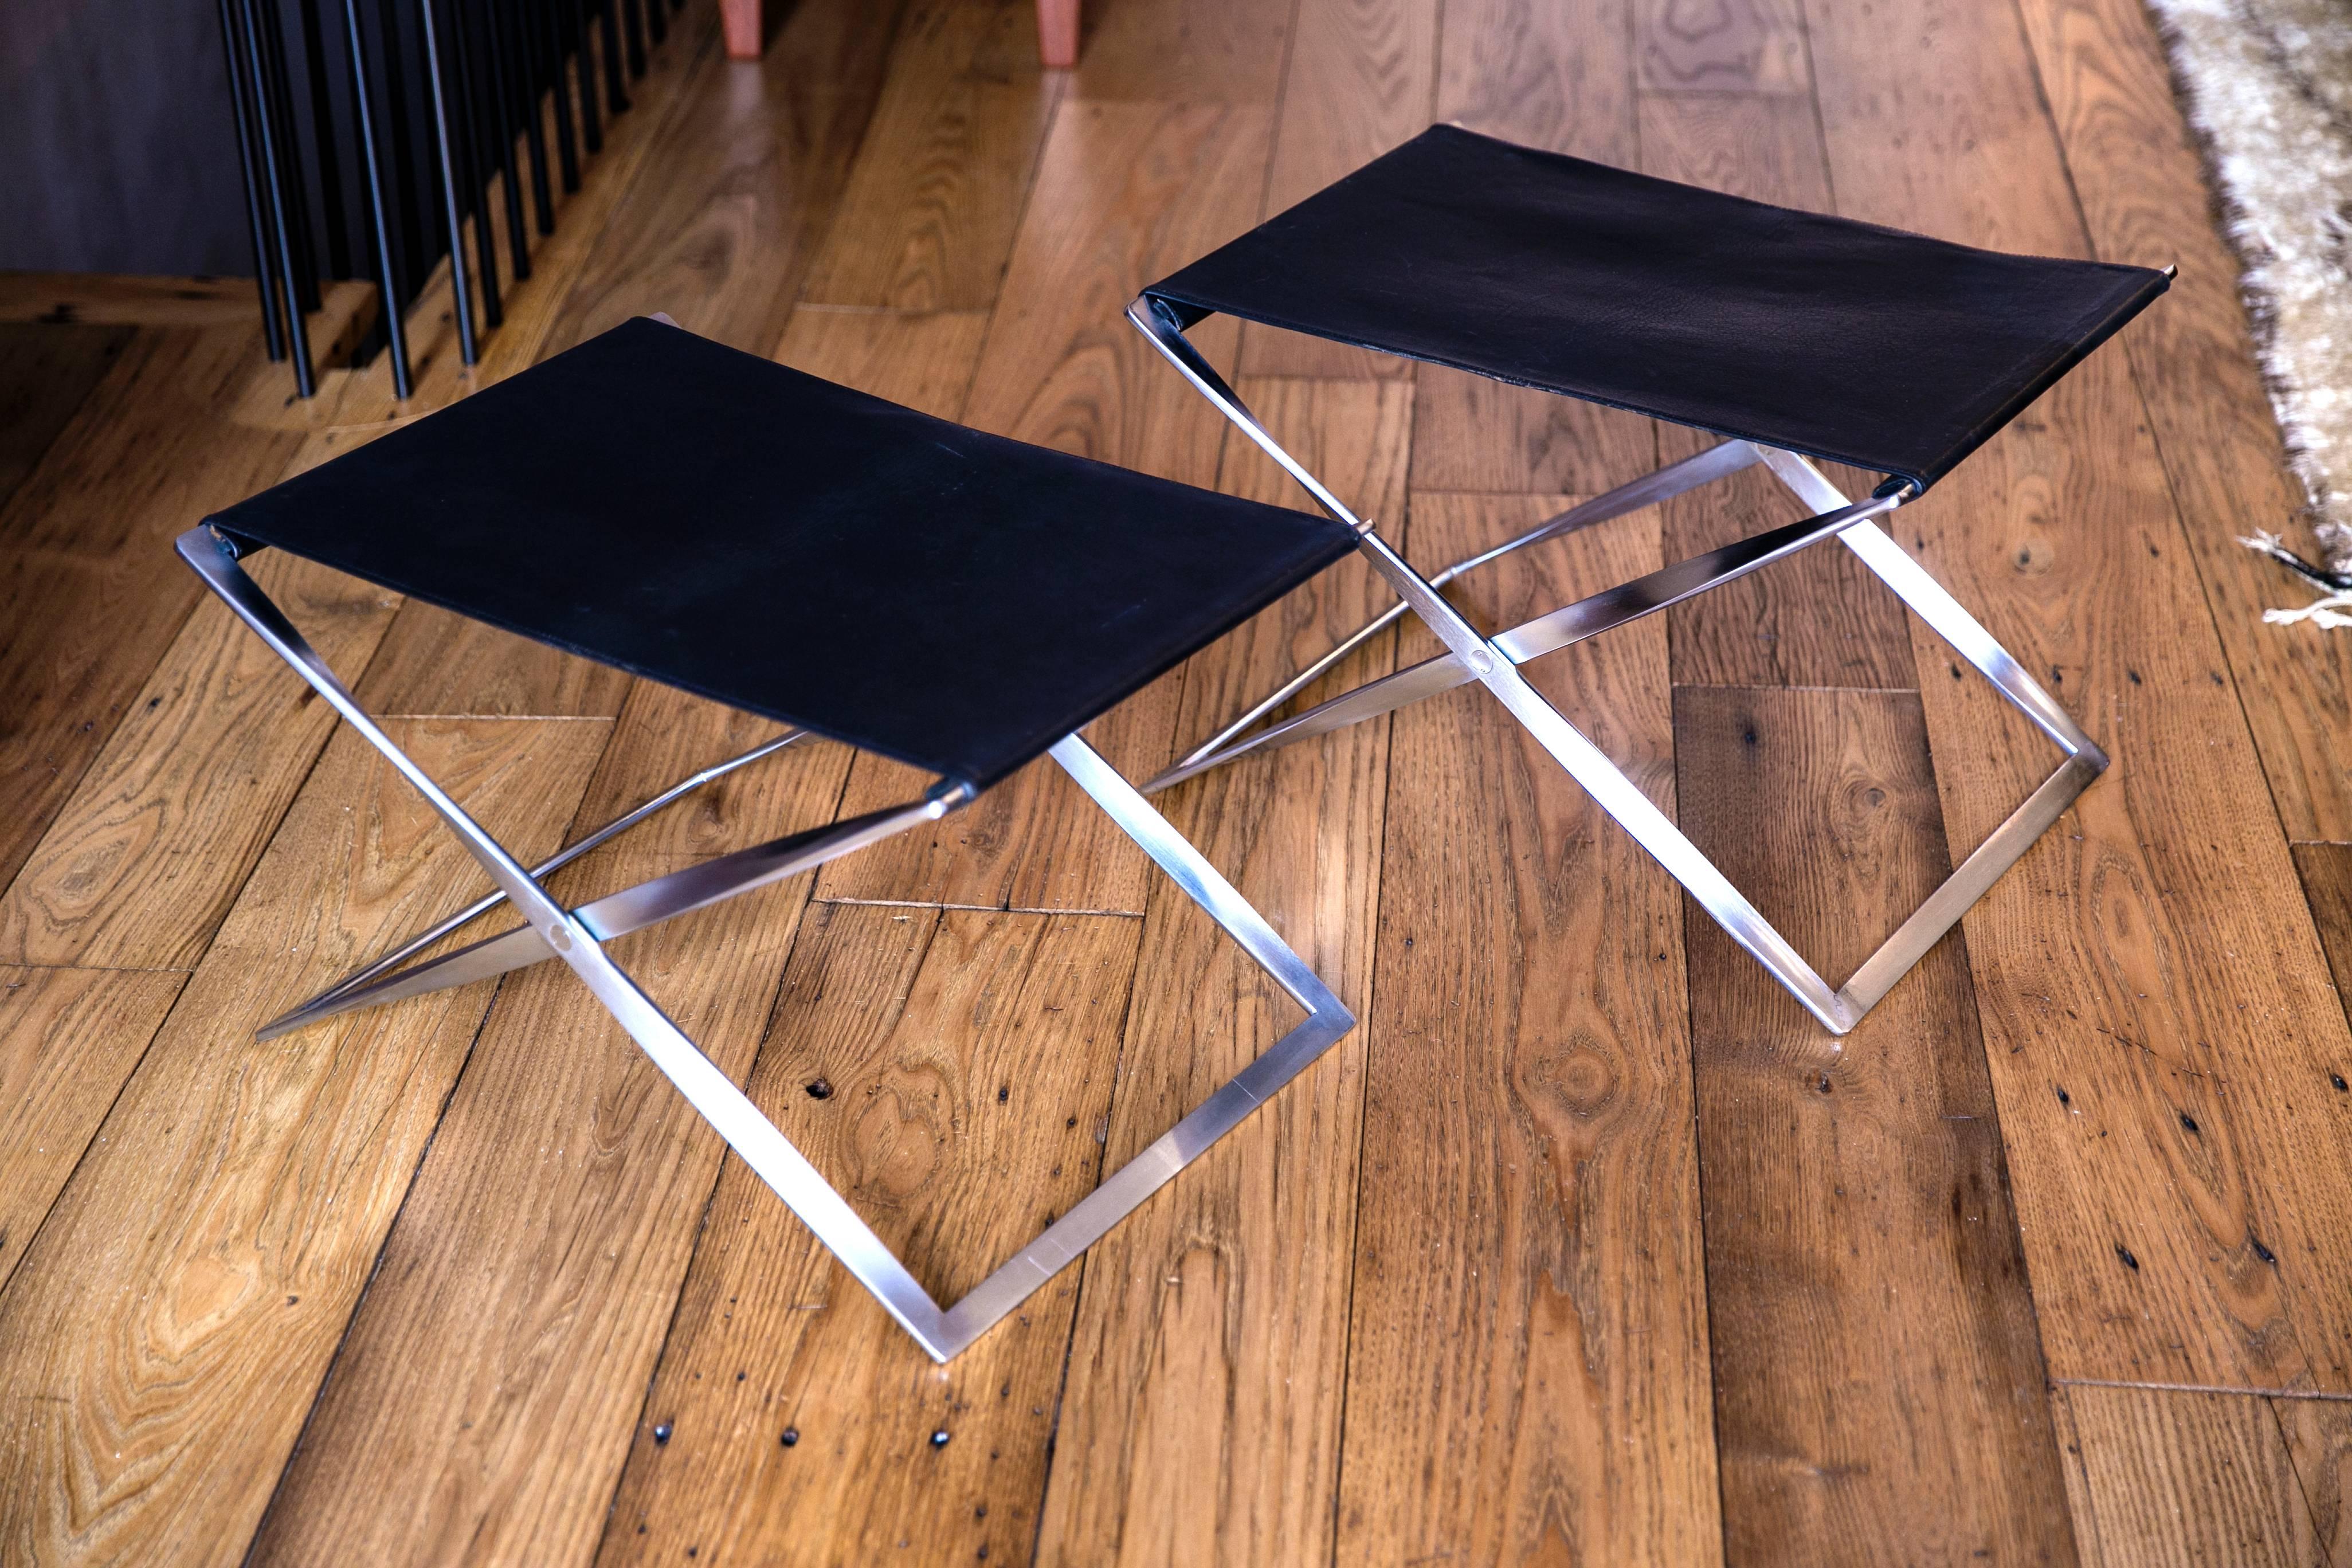 Pair of PK 91 Folding Stools by Poul Kjærholm for E. Kold Christensen. Made by E. Kold Christiansen.

Matte, chrome-plated steel, original black leather seats.

Designed in 1961, Kjærholm took inspiration for his folding stool from many places. He